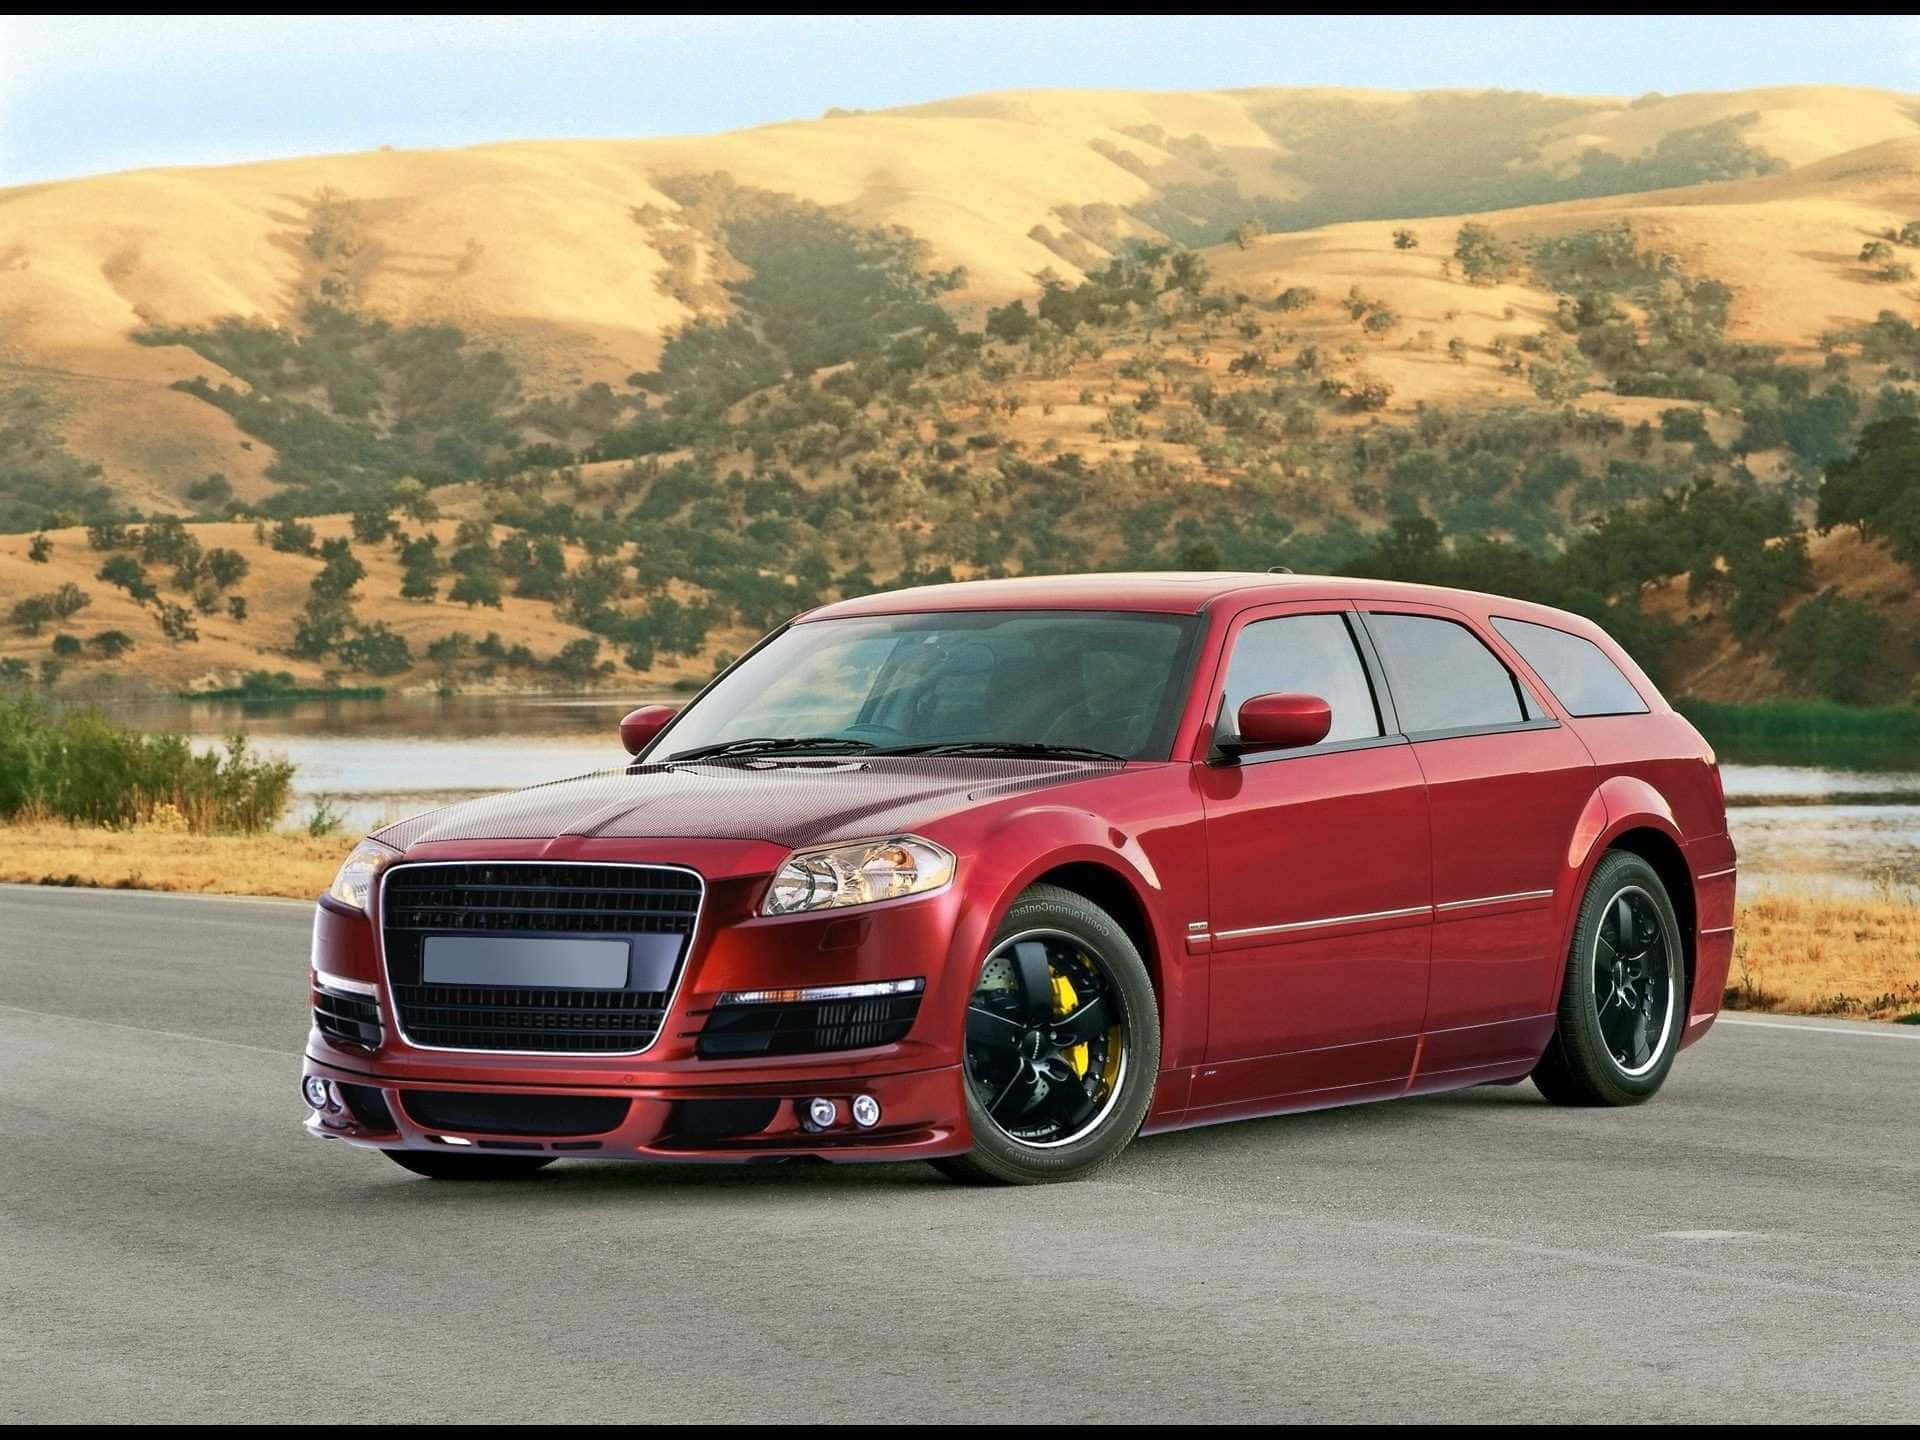 Dynamic Dodge Magnum Cruising The City Streets Wallpaper